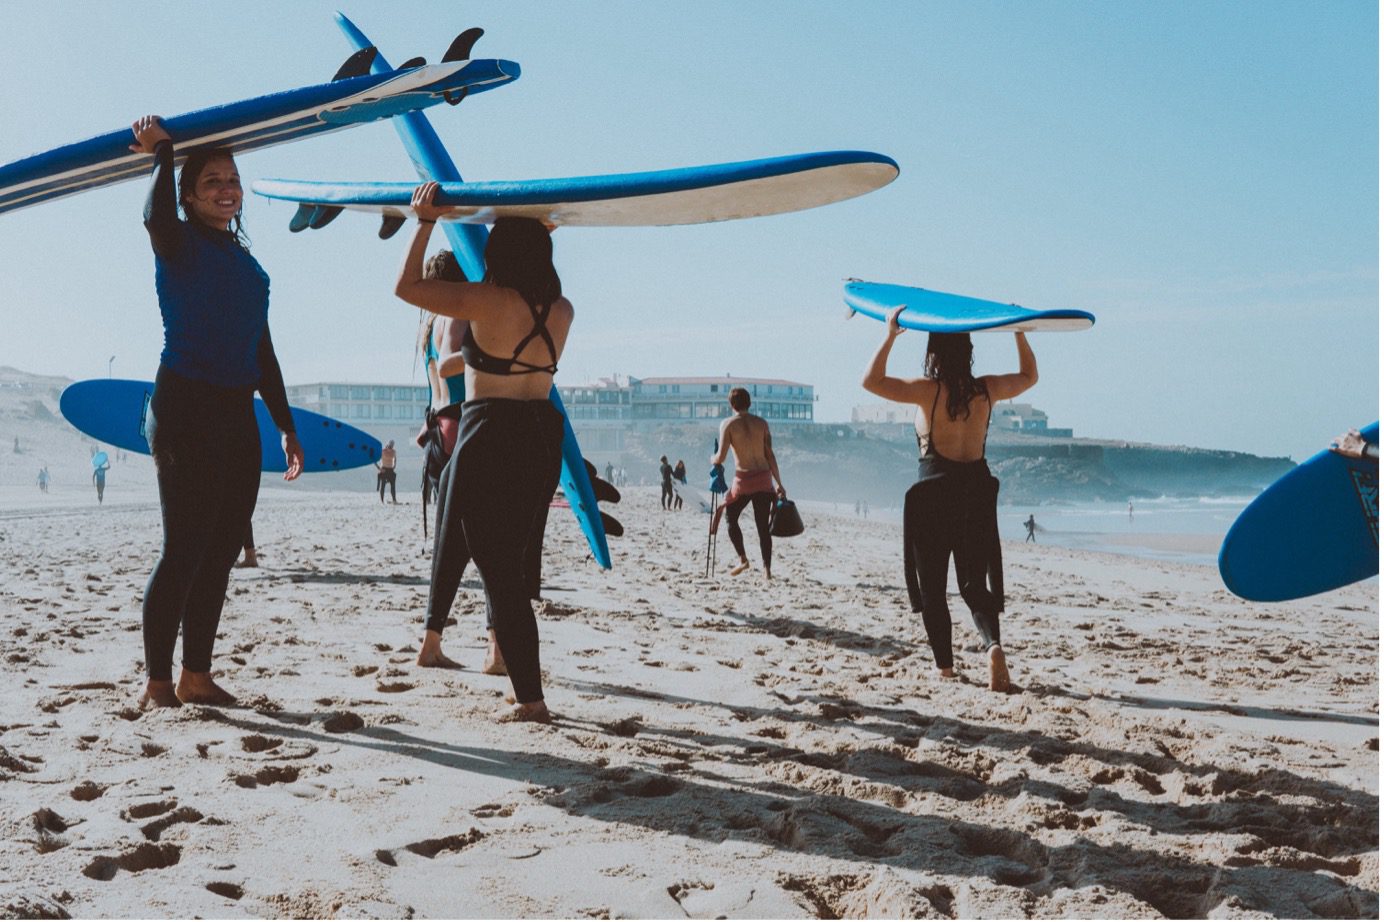 Group of girls getting ready for surfing